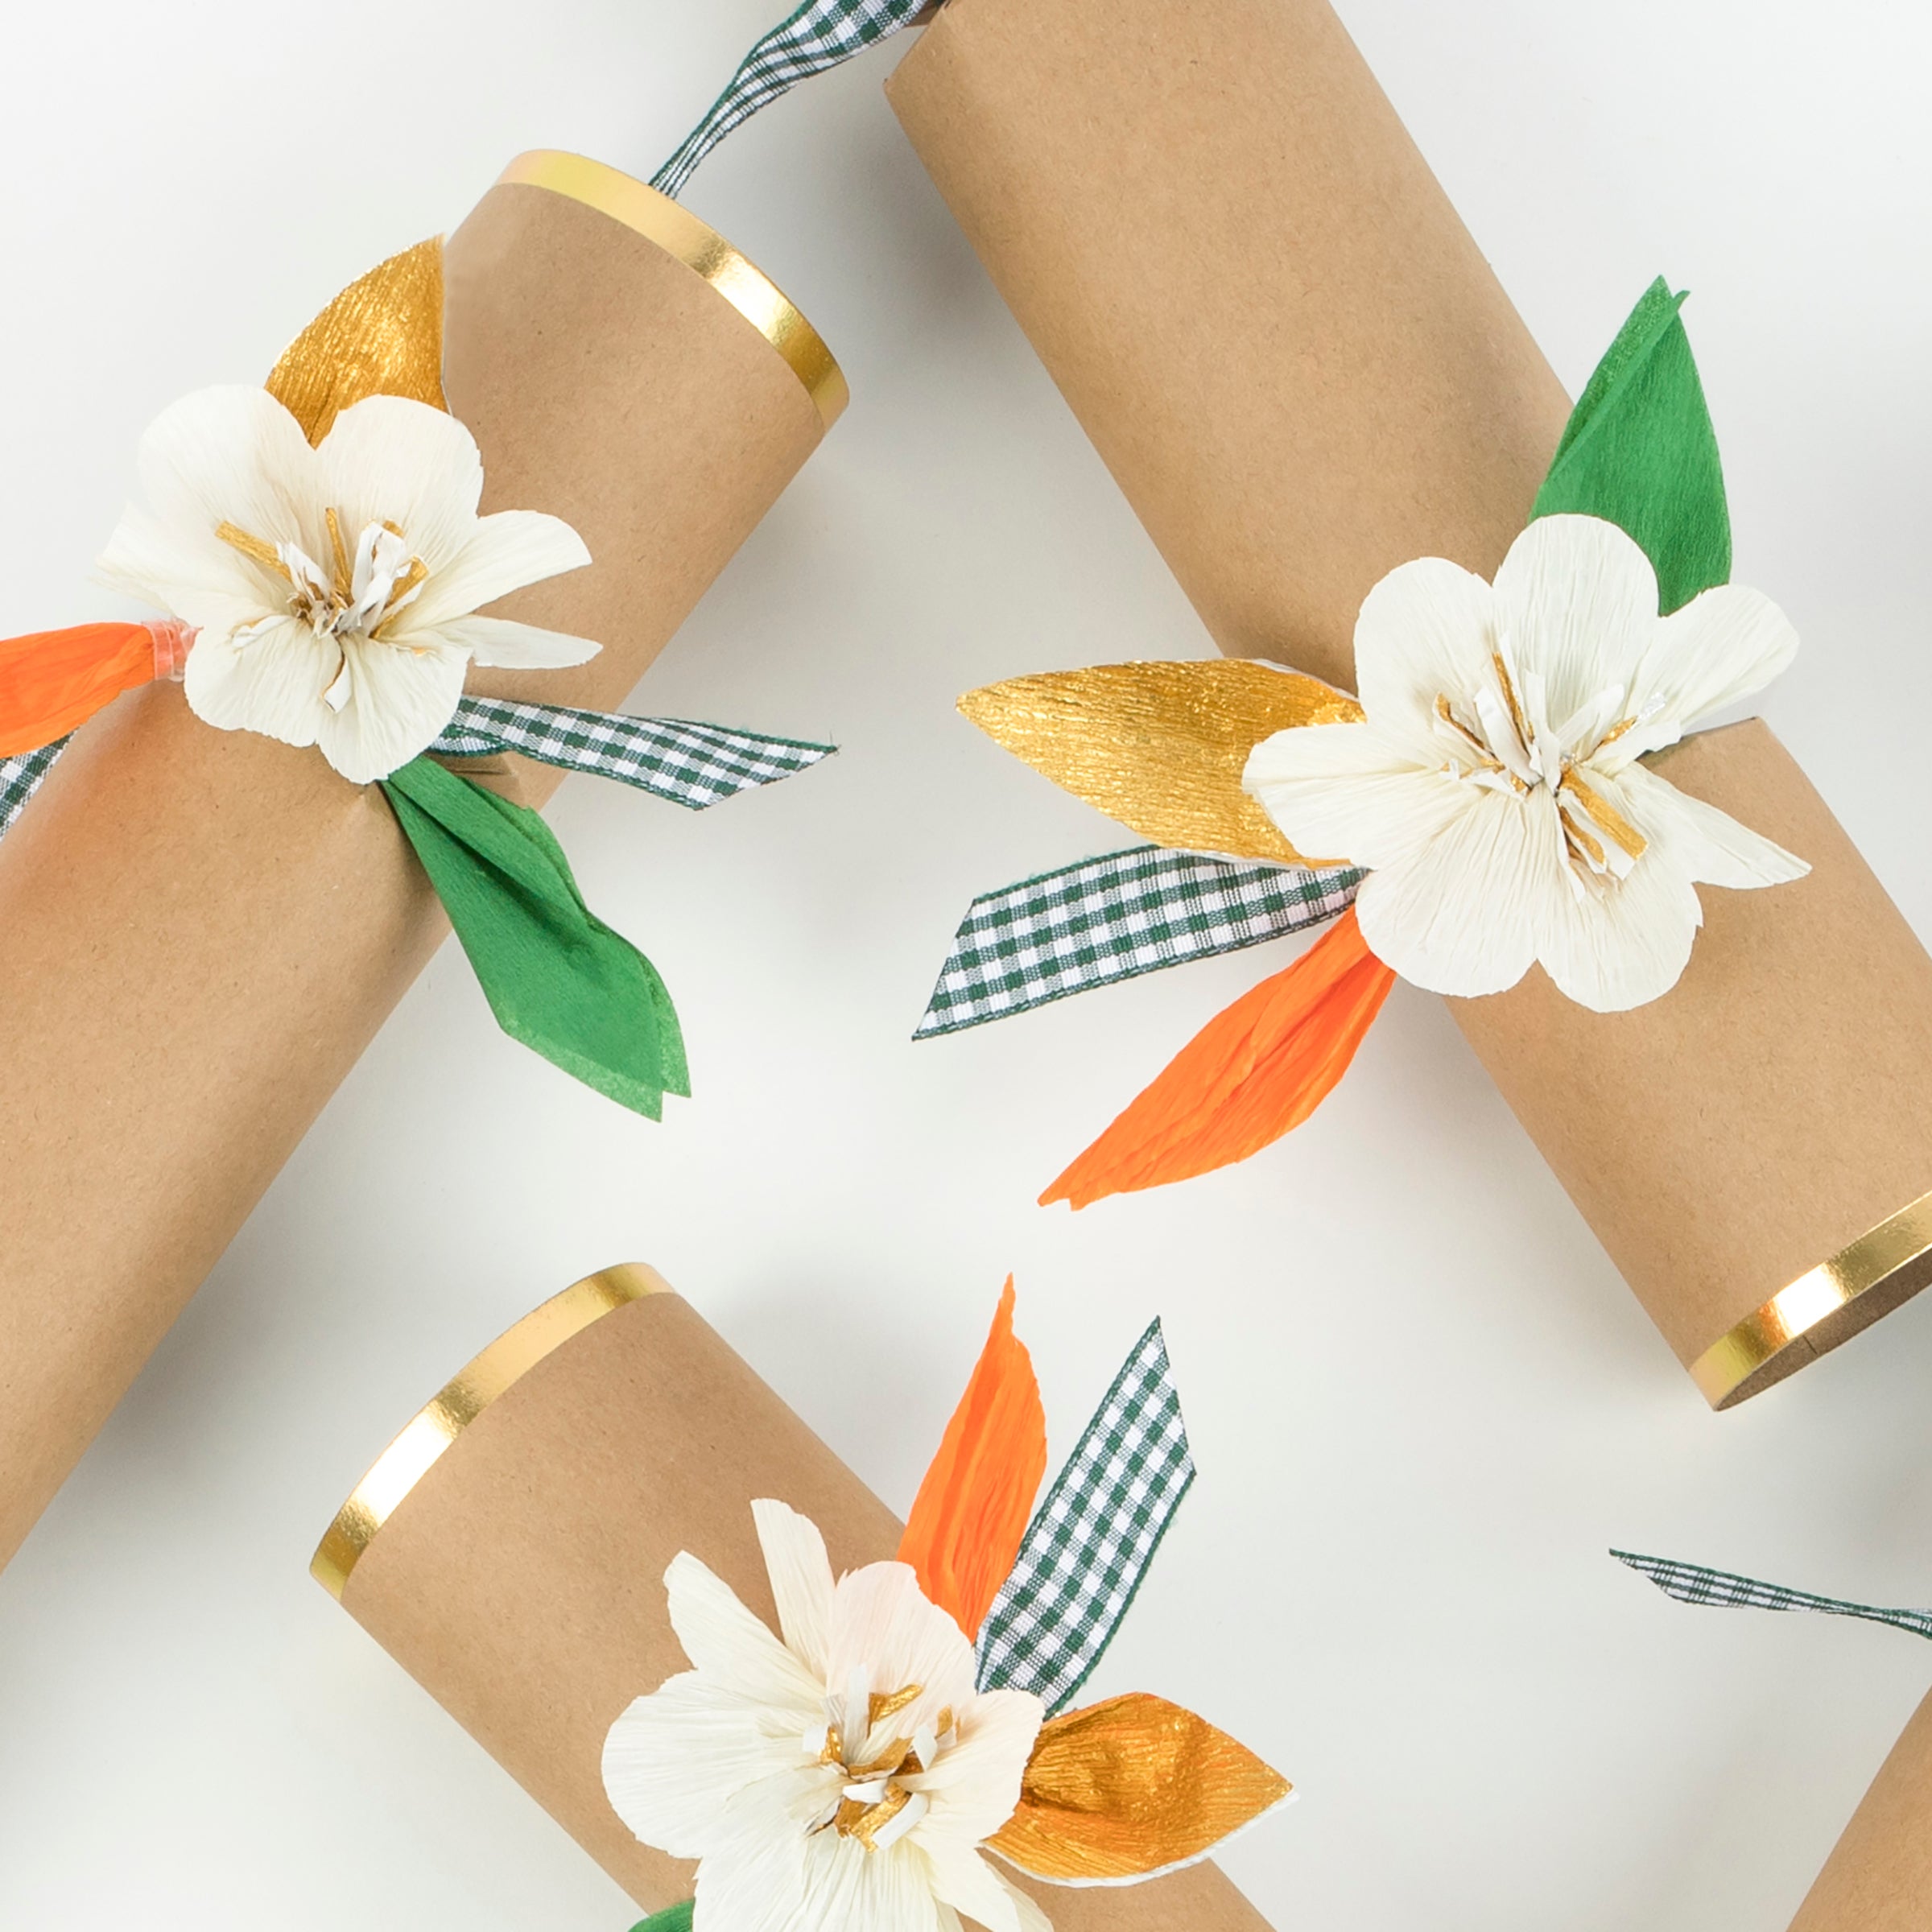 Our flower crackers, which contain gold party hats and luxury metal gifts, are perfect for your Thanksgiving table decor.